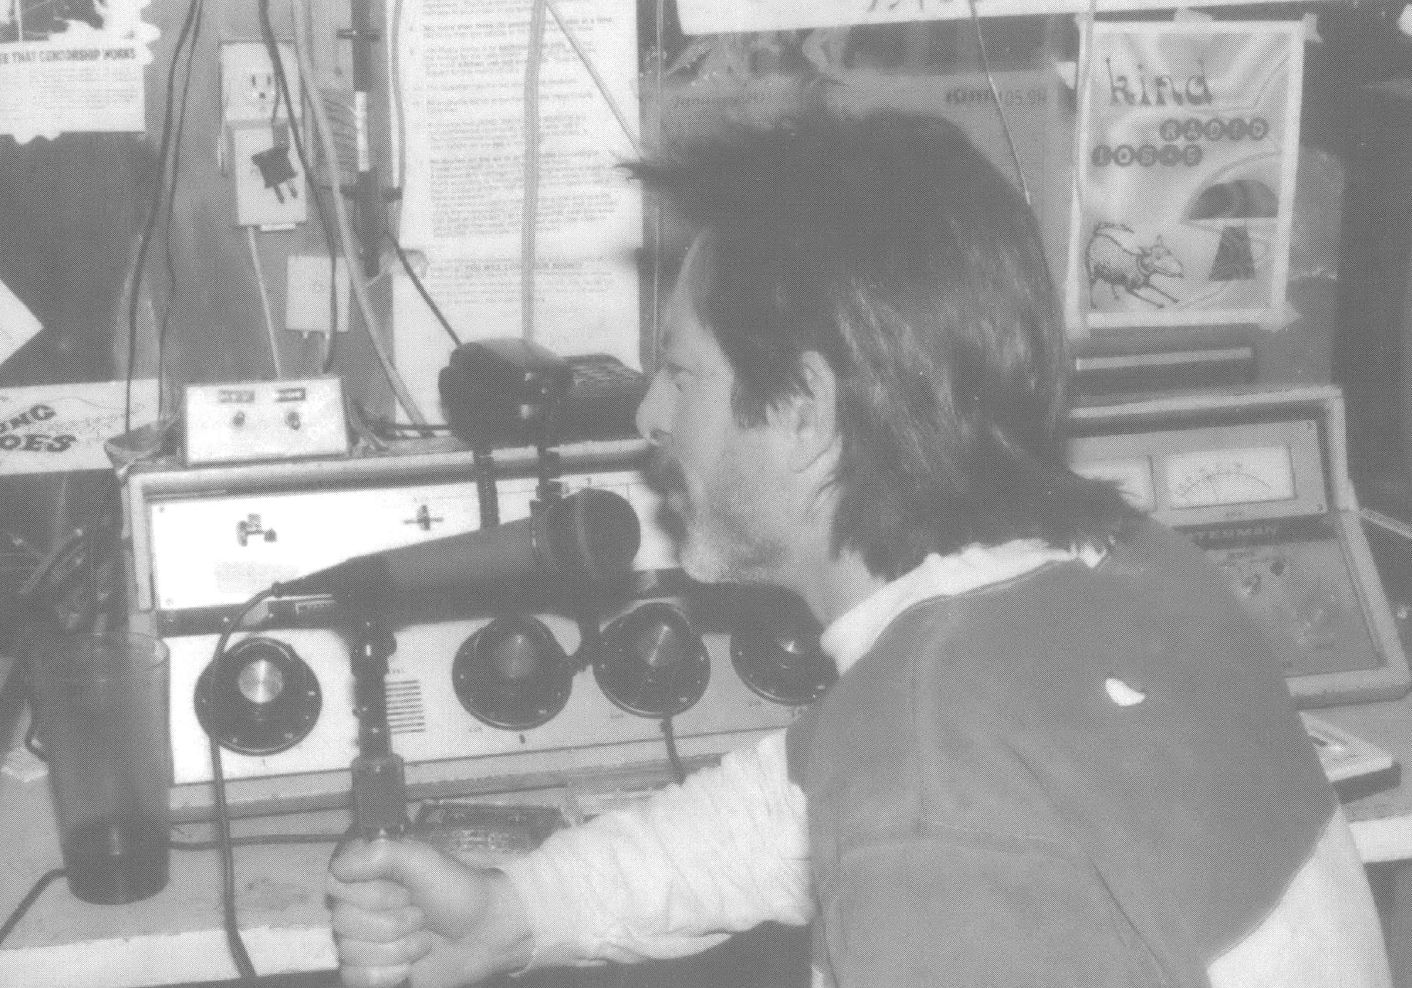 Man with mullet talking into a radio microphone